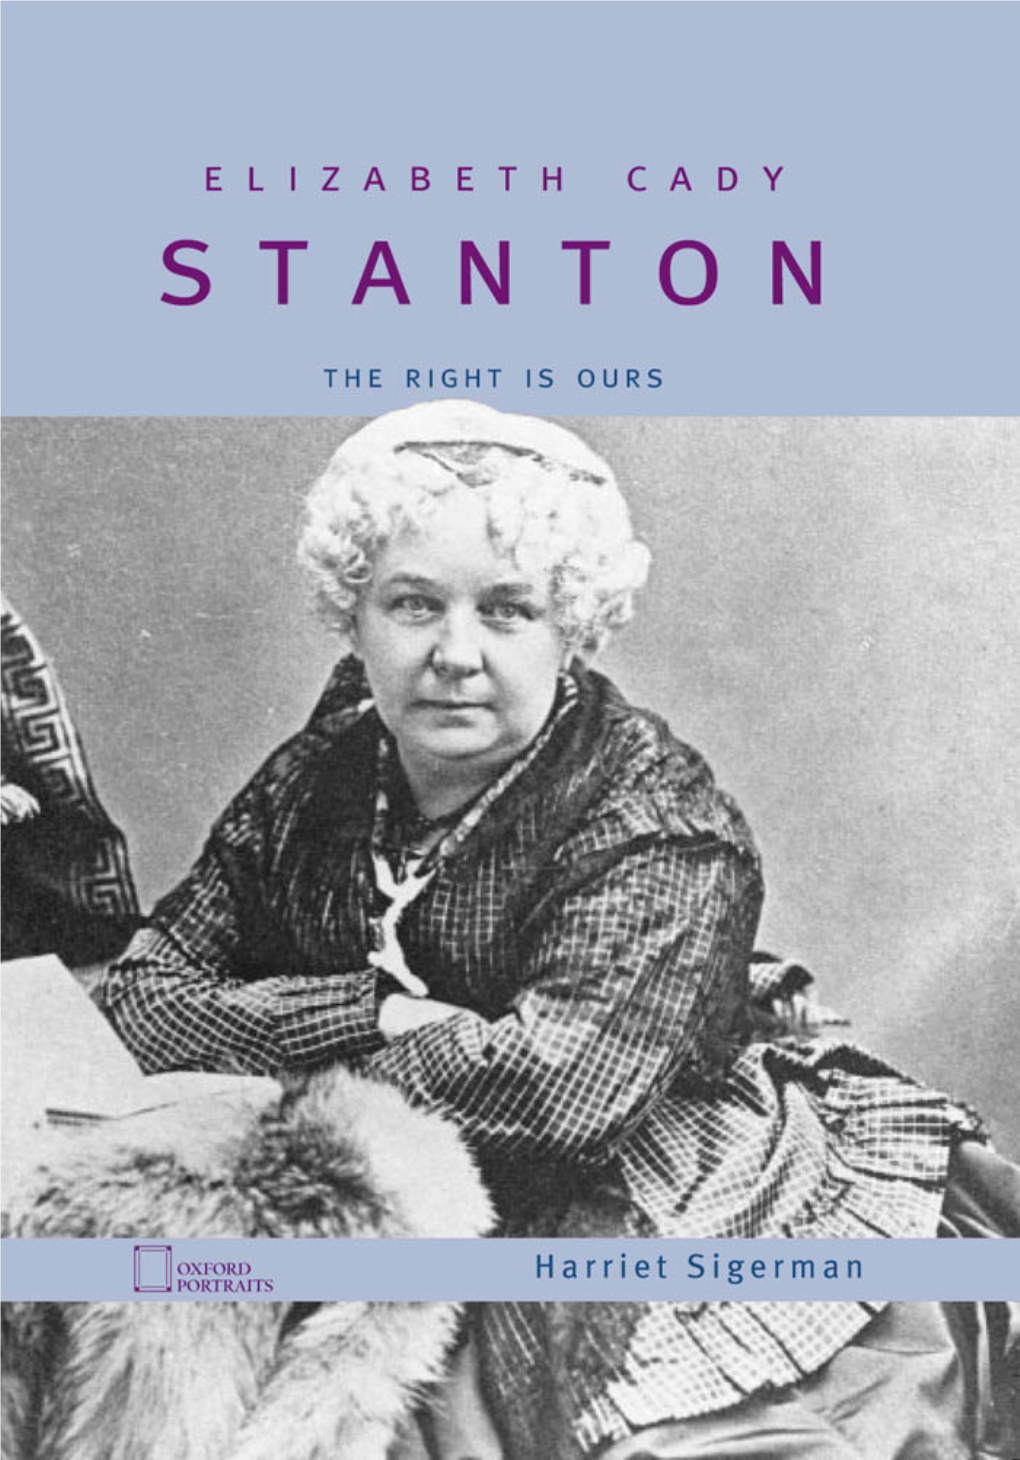 Elizabeth Cady Stanton: the Right Is Ours (Oxford Portraits)